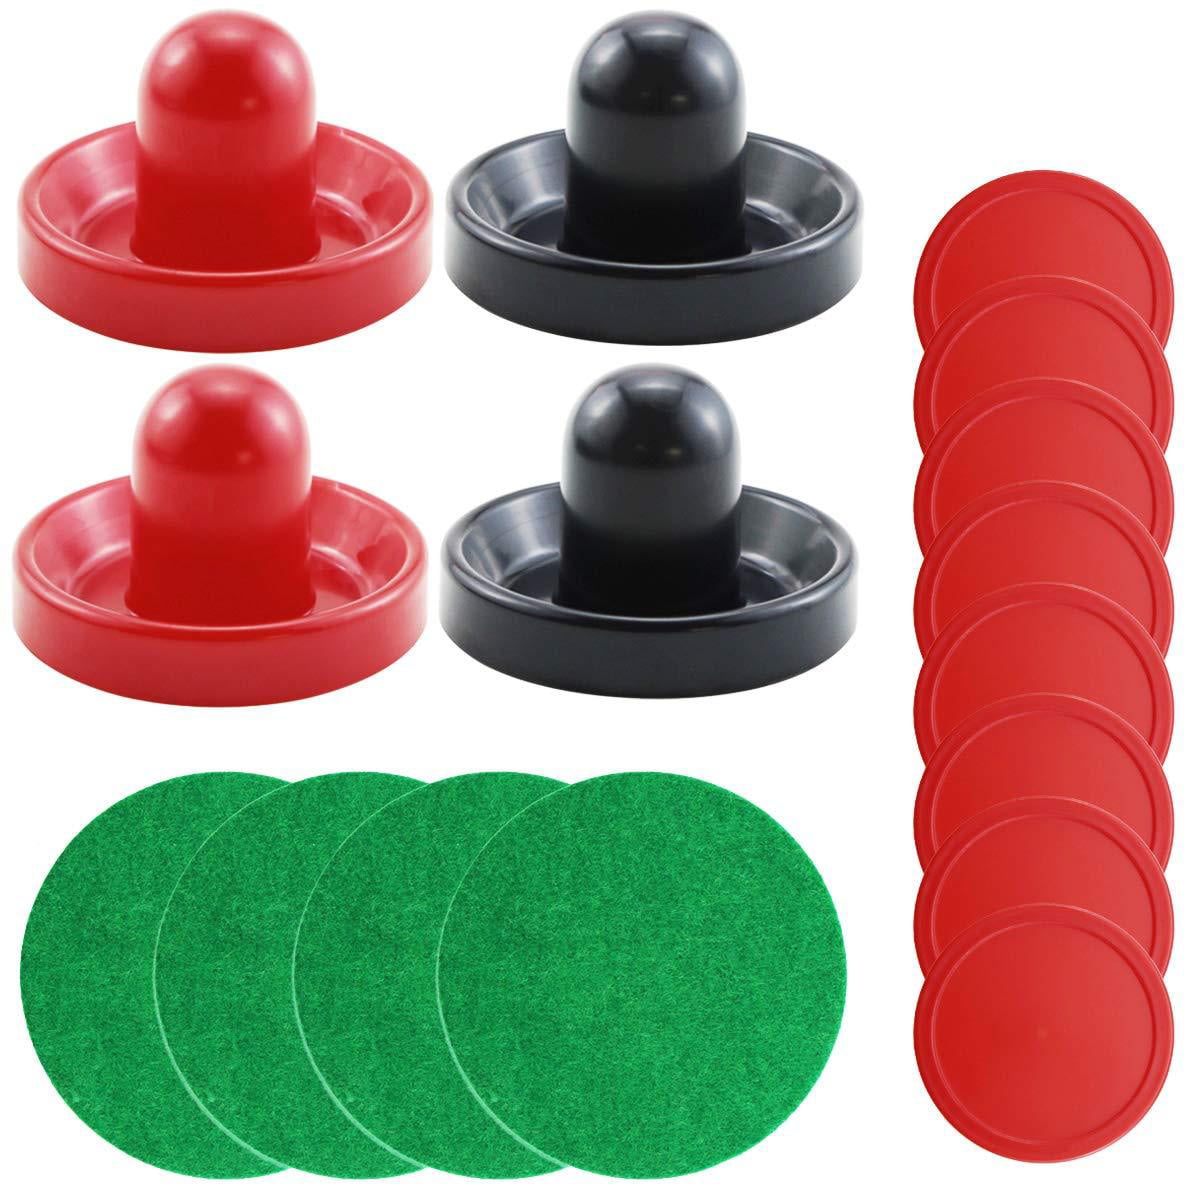 Details about   4Pcs Air Hockey Table Goalies with 4pcs Puck Felt Pusher Mallet Grip Red 